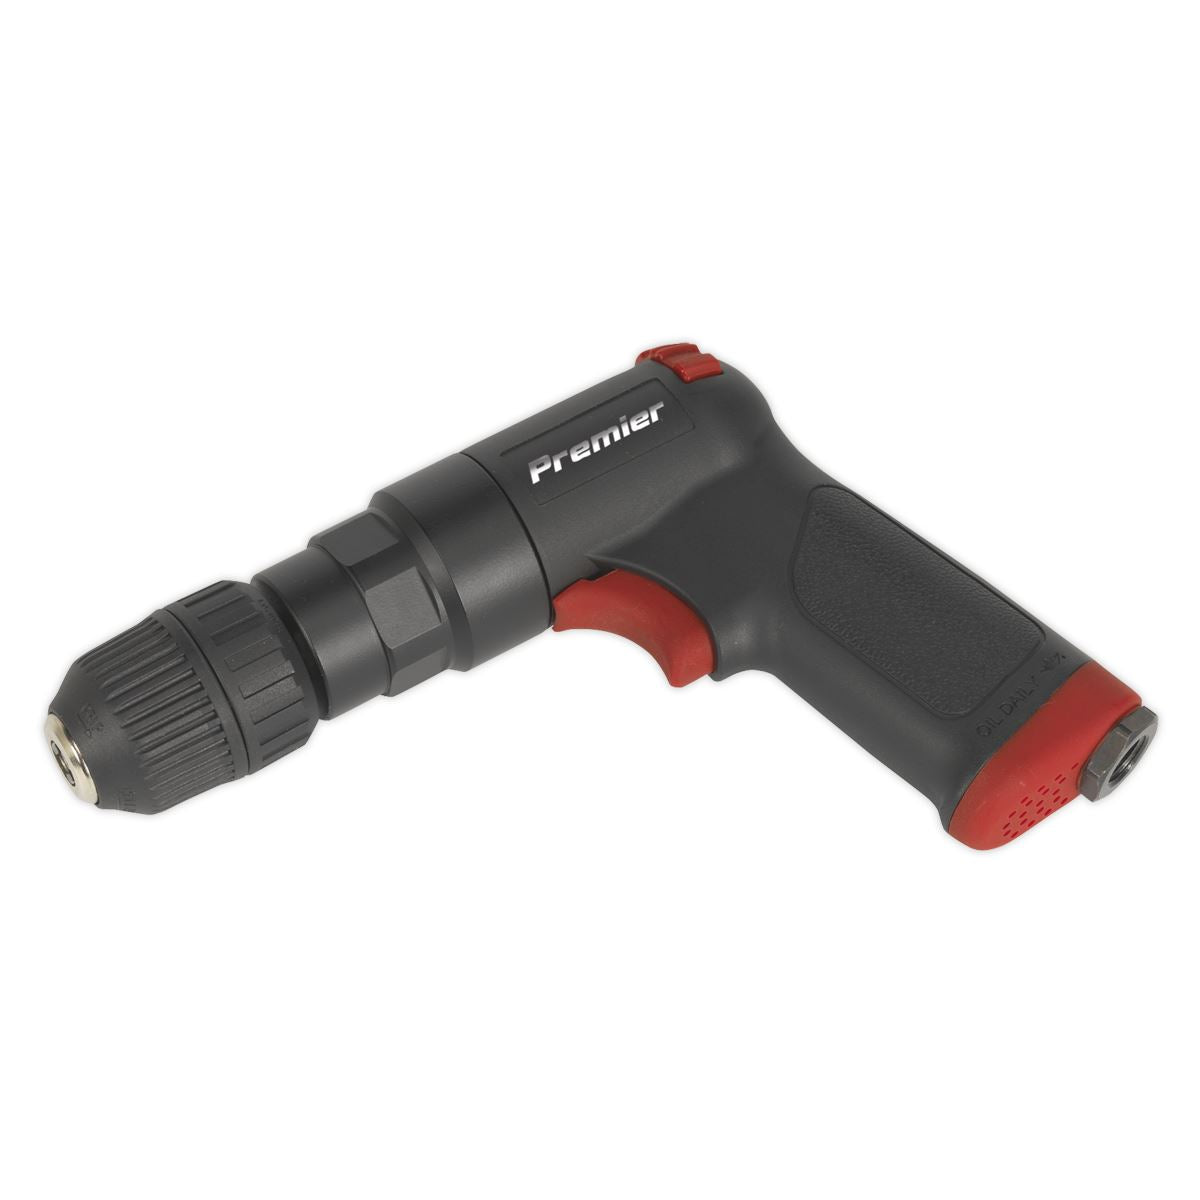 Sealey Premier Air Pistol Drill Ø10mm with Keyless Chuck Composite Reversible - Premier